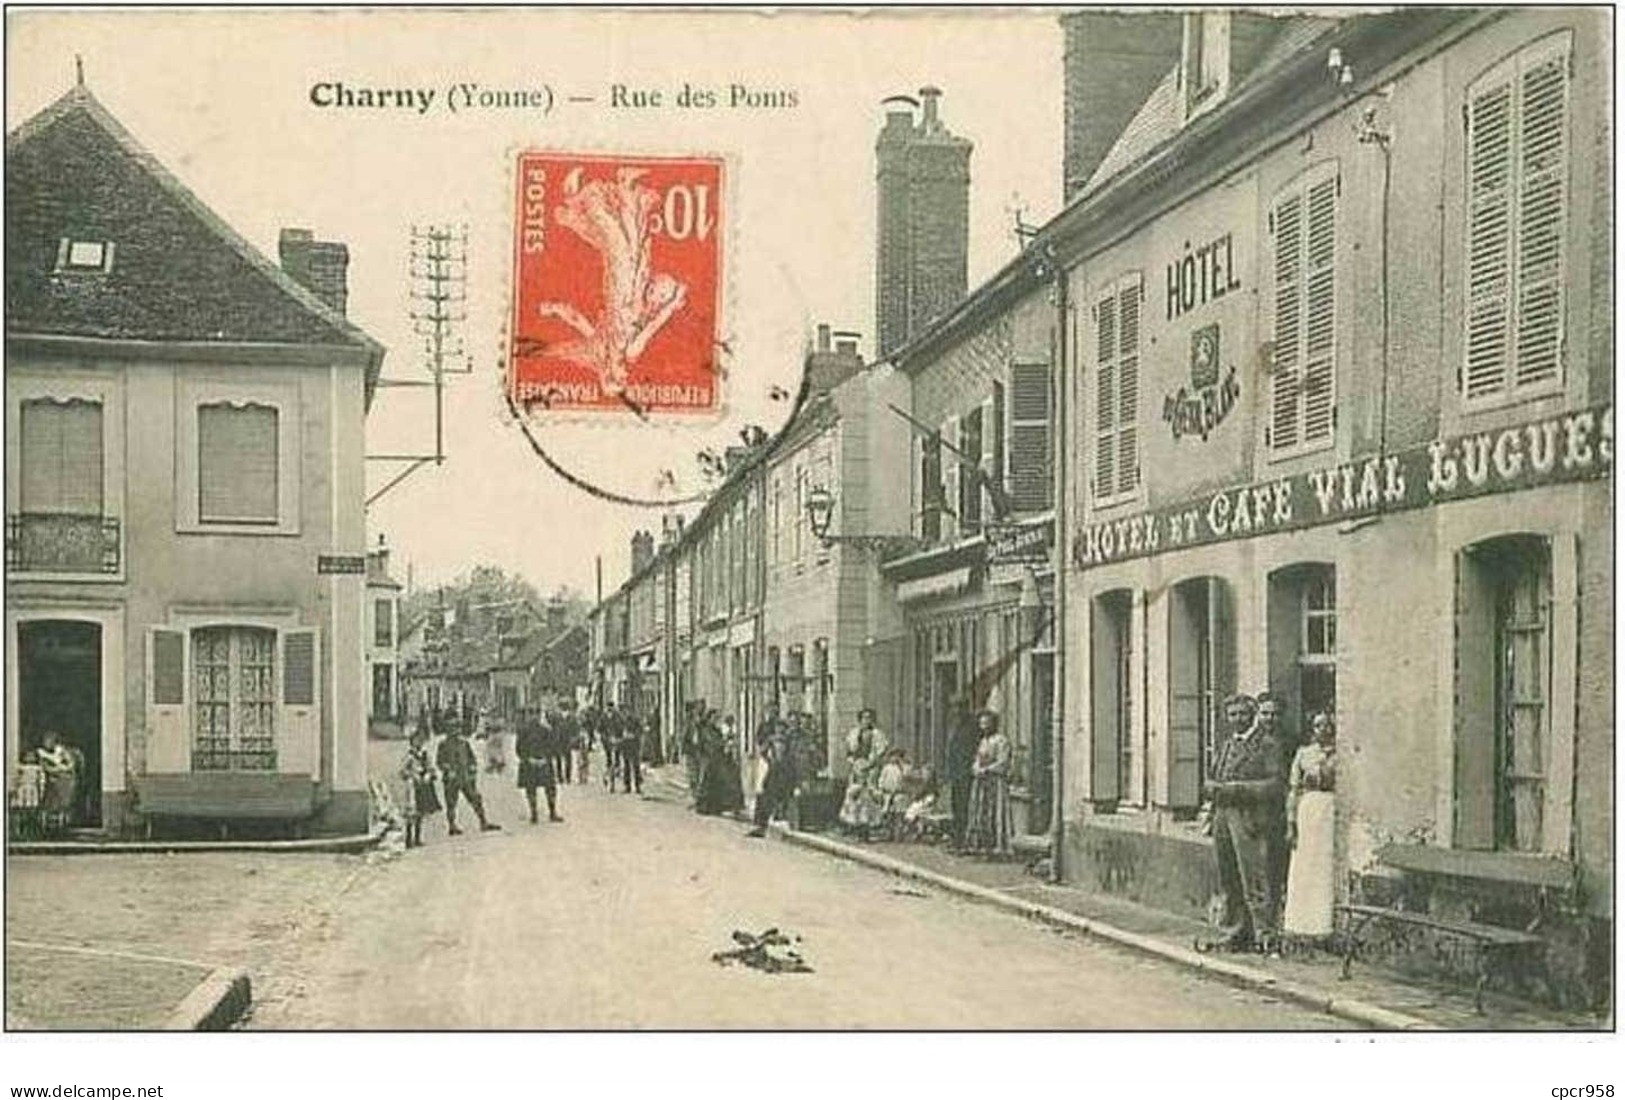 89.CHARNY.RUE DES PONTS.HOTEL ET CAFE VIAL LUGUES - Charny